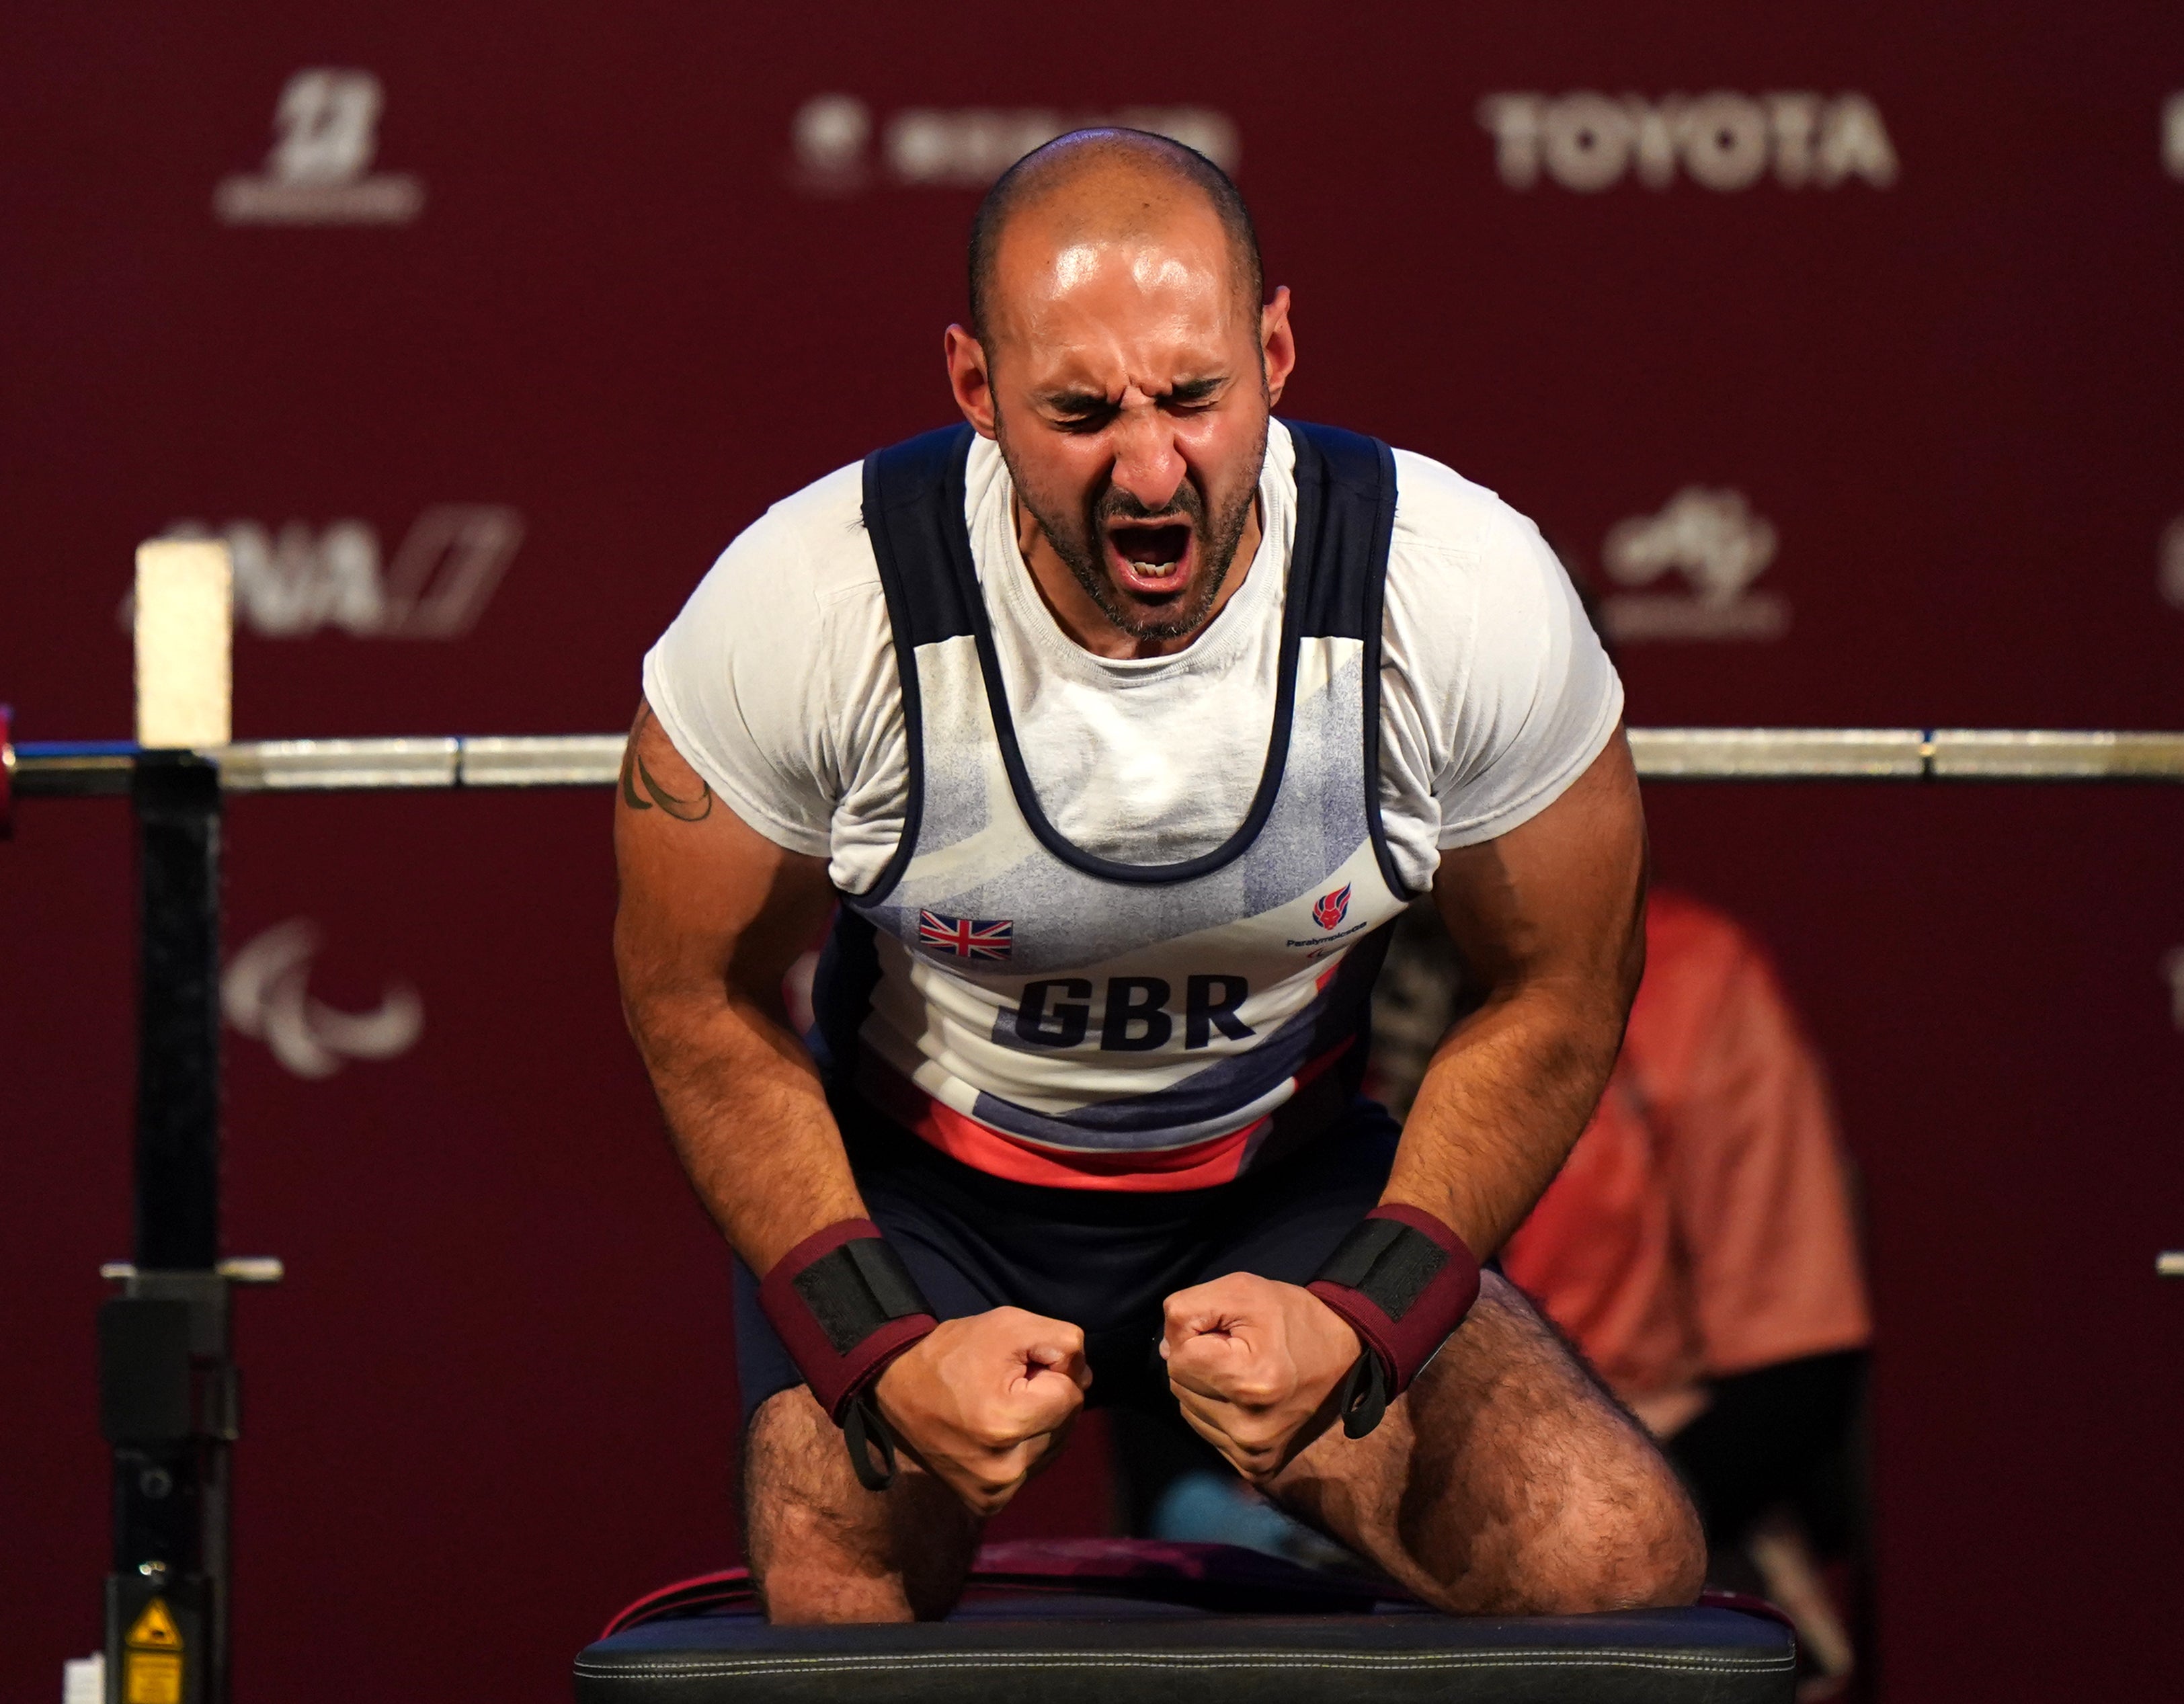 Great Britain’s Ali Jawad made major sacrifices to be in Tokyo